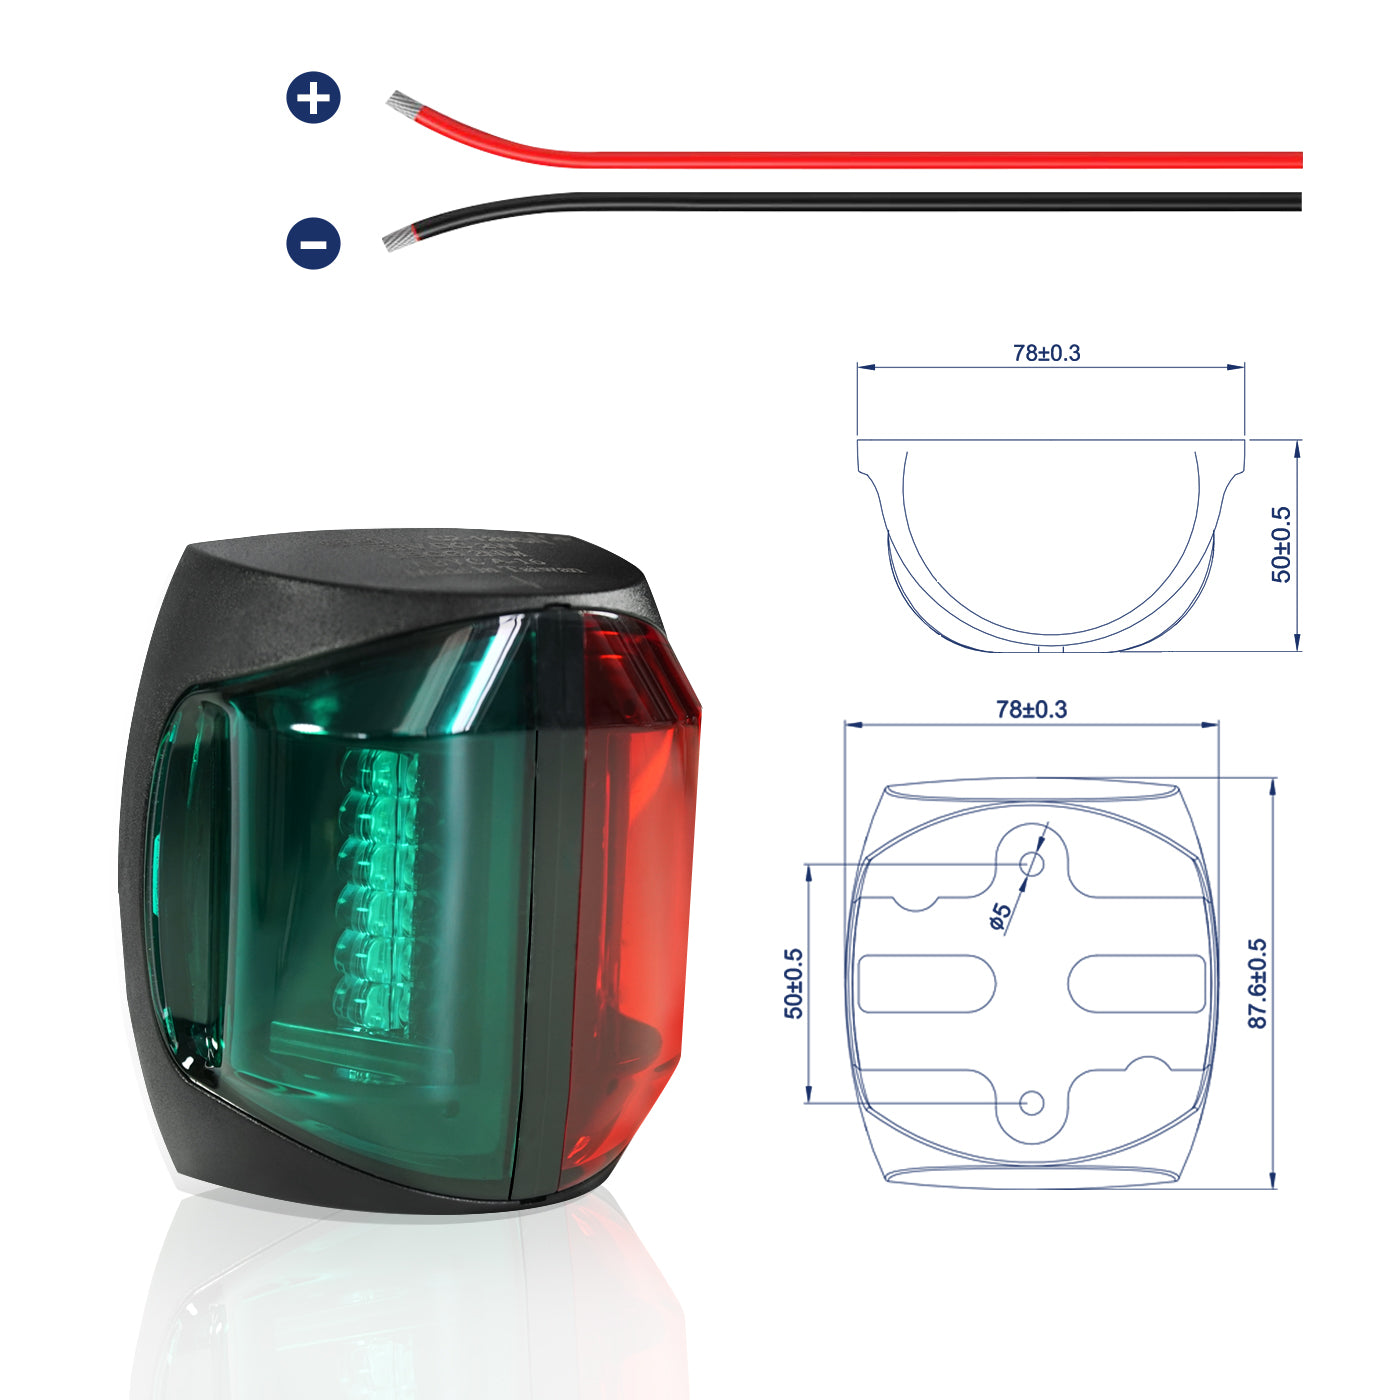 2 NM White LED 135° Stern Light+3 NM Bi-Color LED (Green and Red) 225° Boat Navigation Light, US Coast Guard, ABYC A-16 and CE Certifications – Operates at 12V/24V IP67 - THALASSA